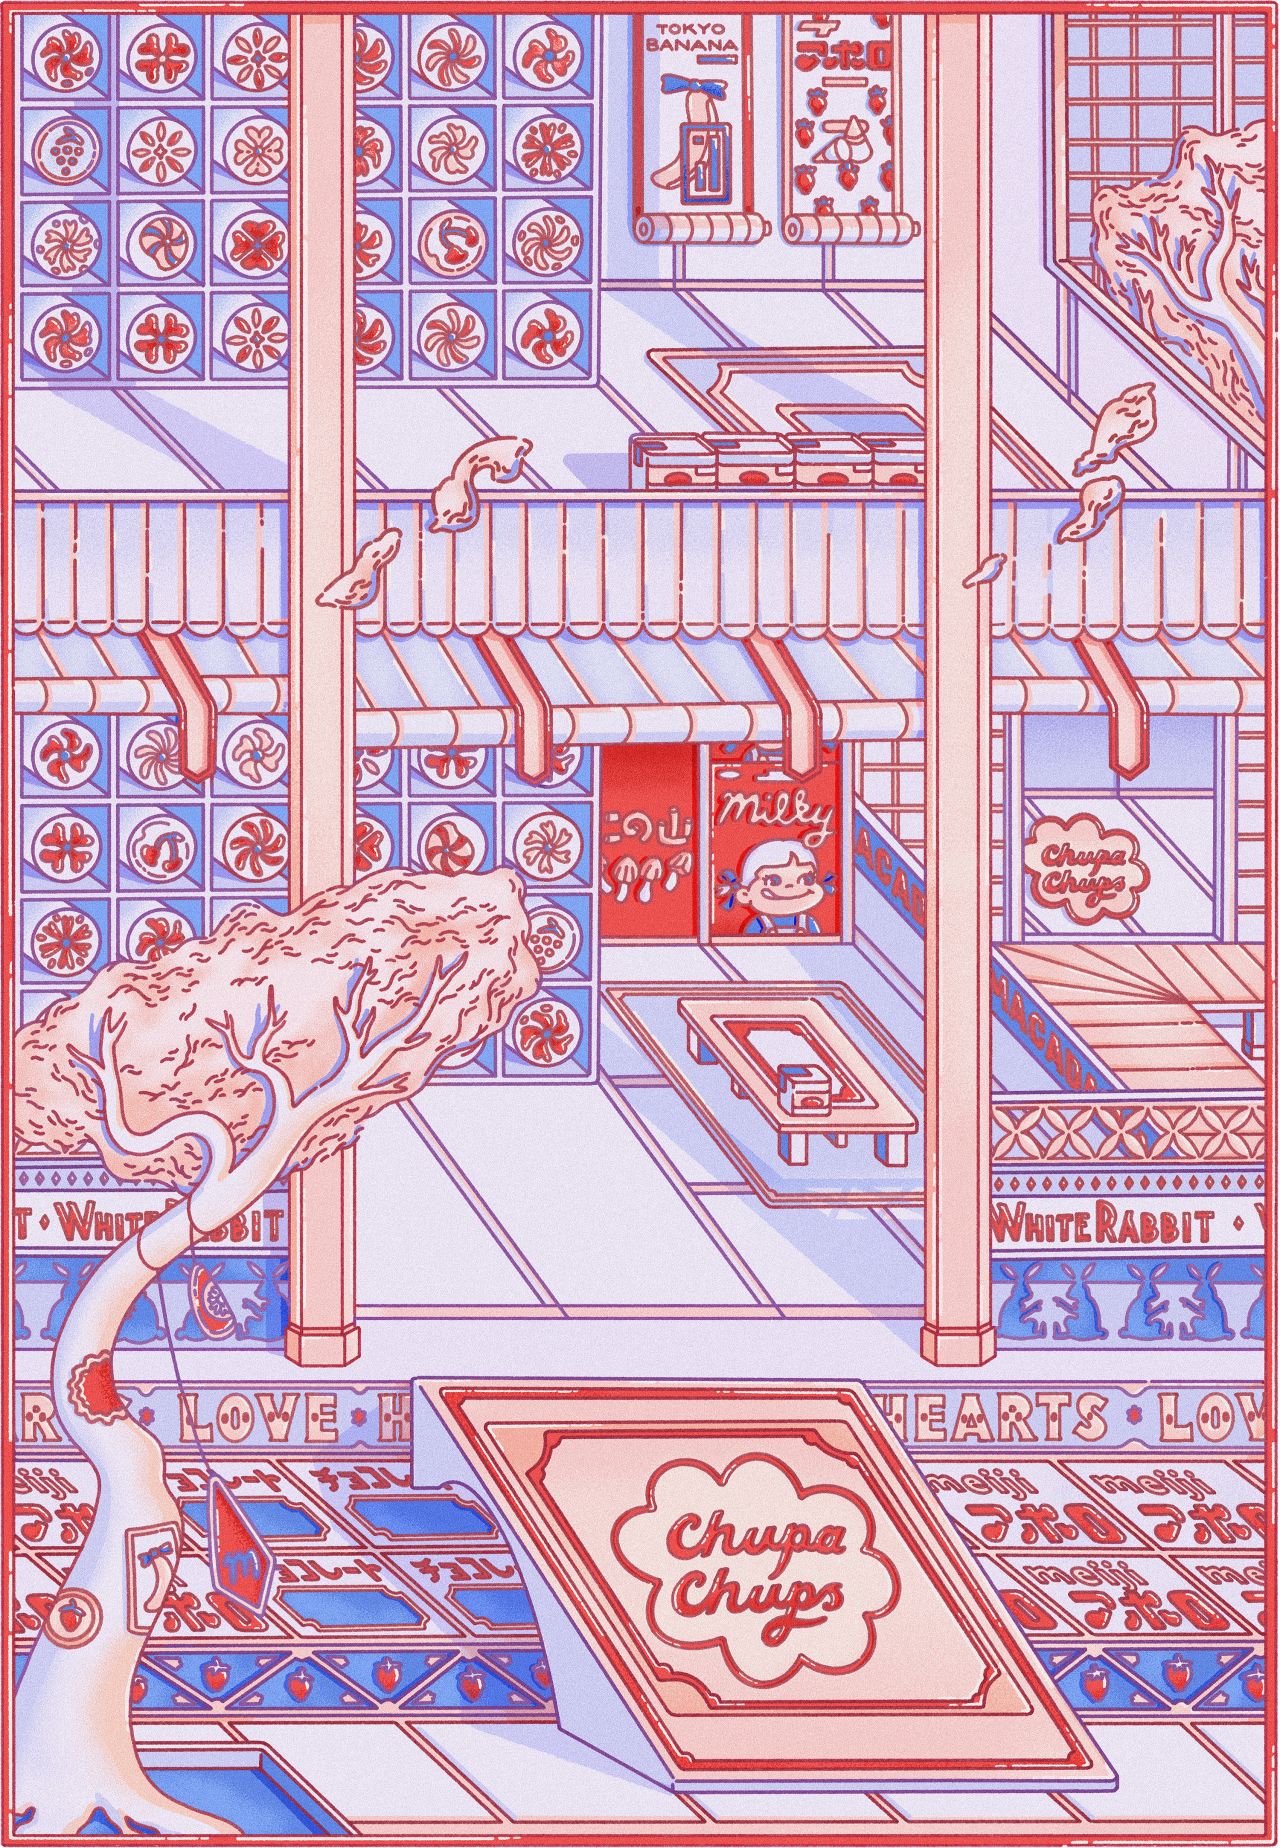 Lauren Ly's obsession with mini markets spills out into Japanese ukiyo-e  style illustrations